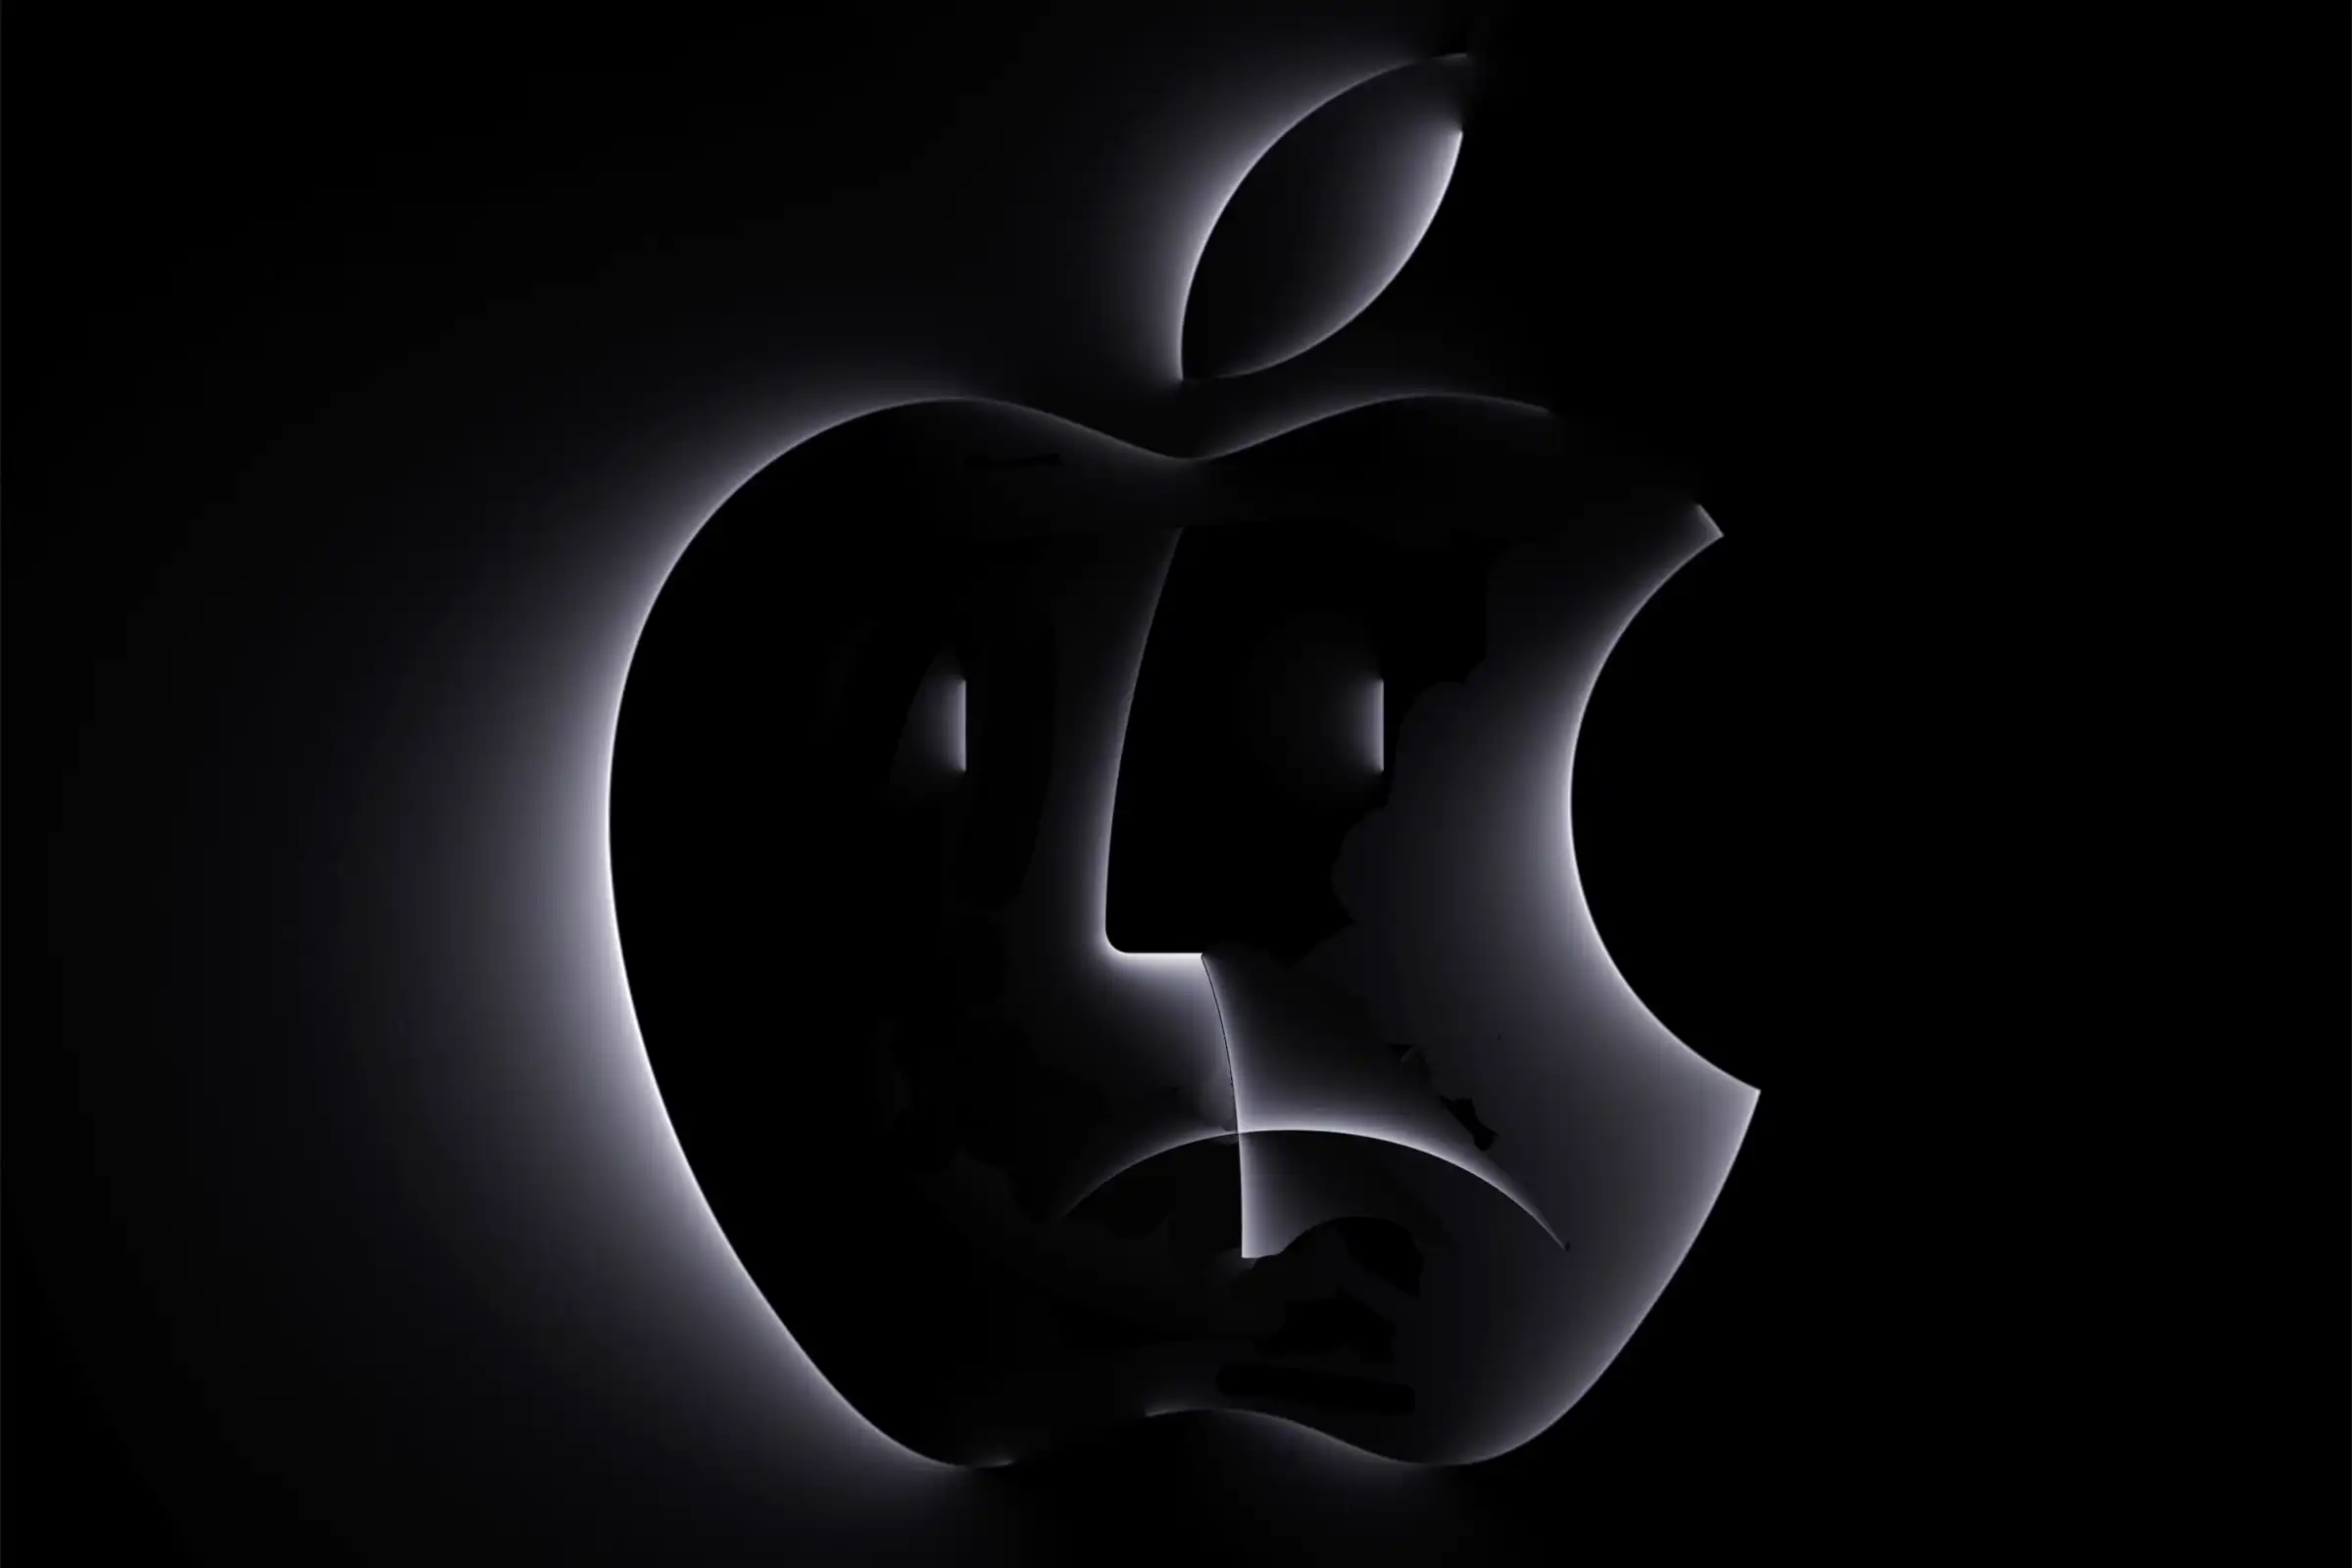 Apple “Scary Fast” Event: What to Expect